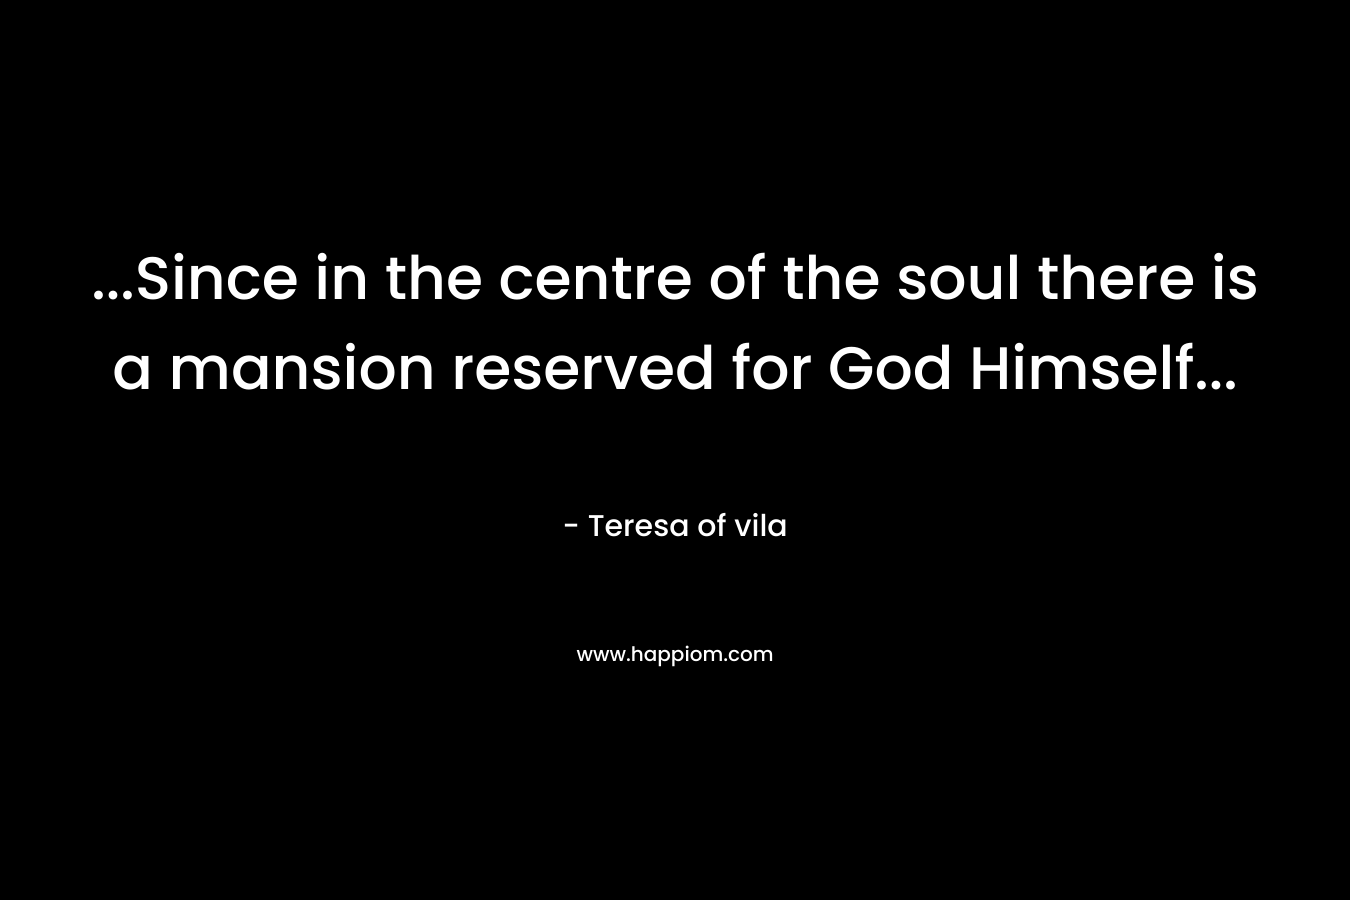 …Since in the centre of the soul there is a mansion reserved for God Himself… – Teresa of vila